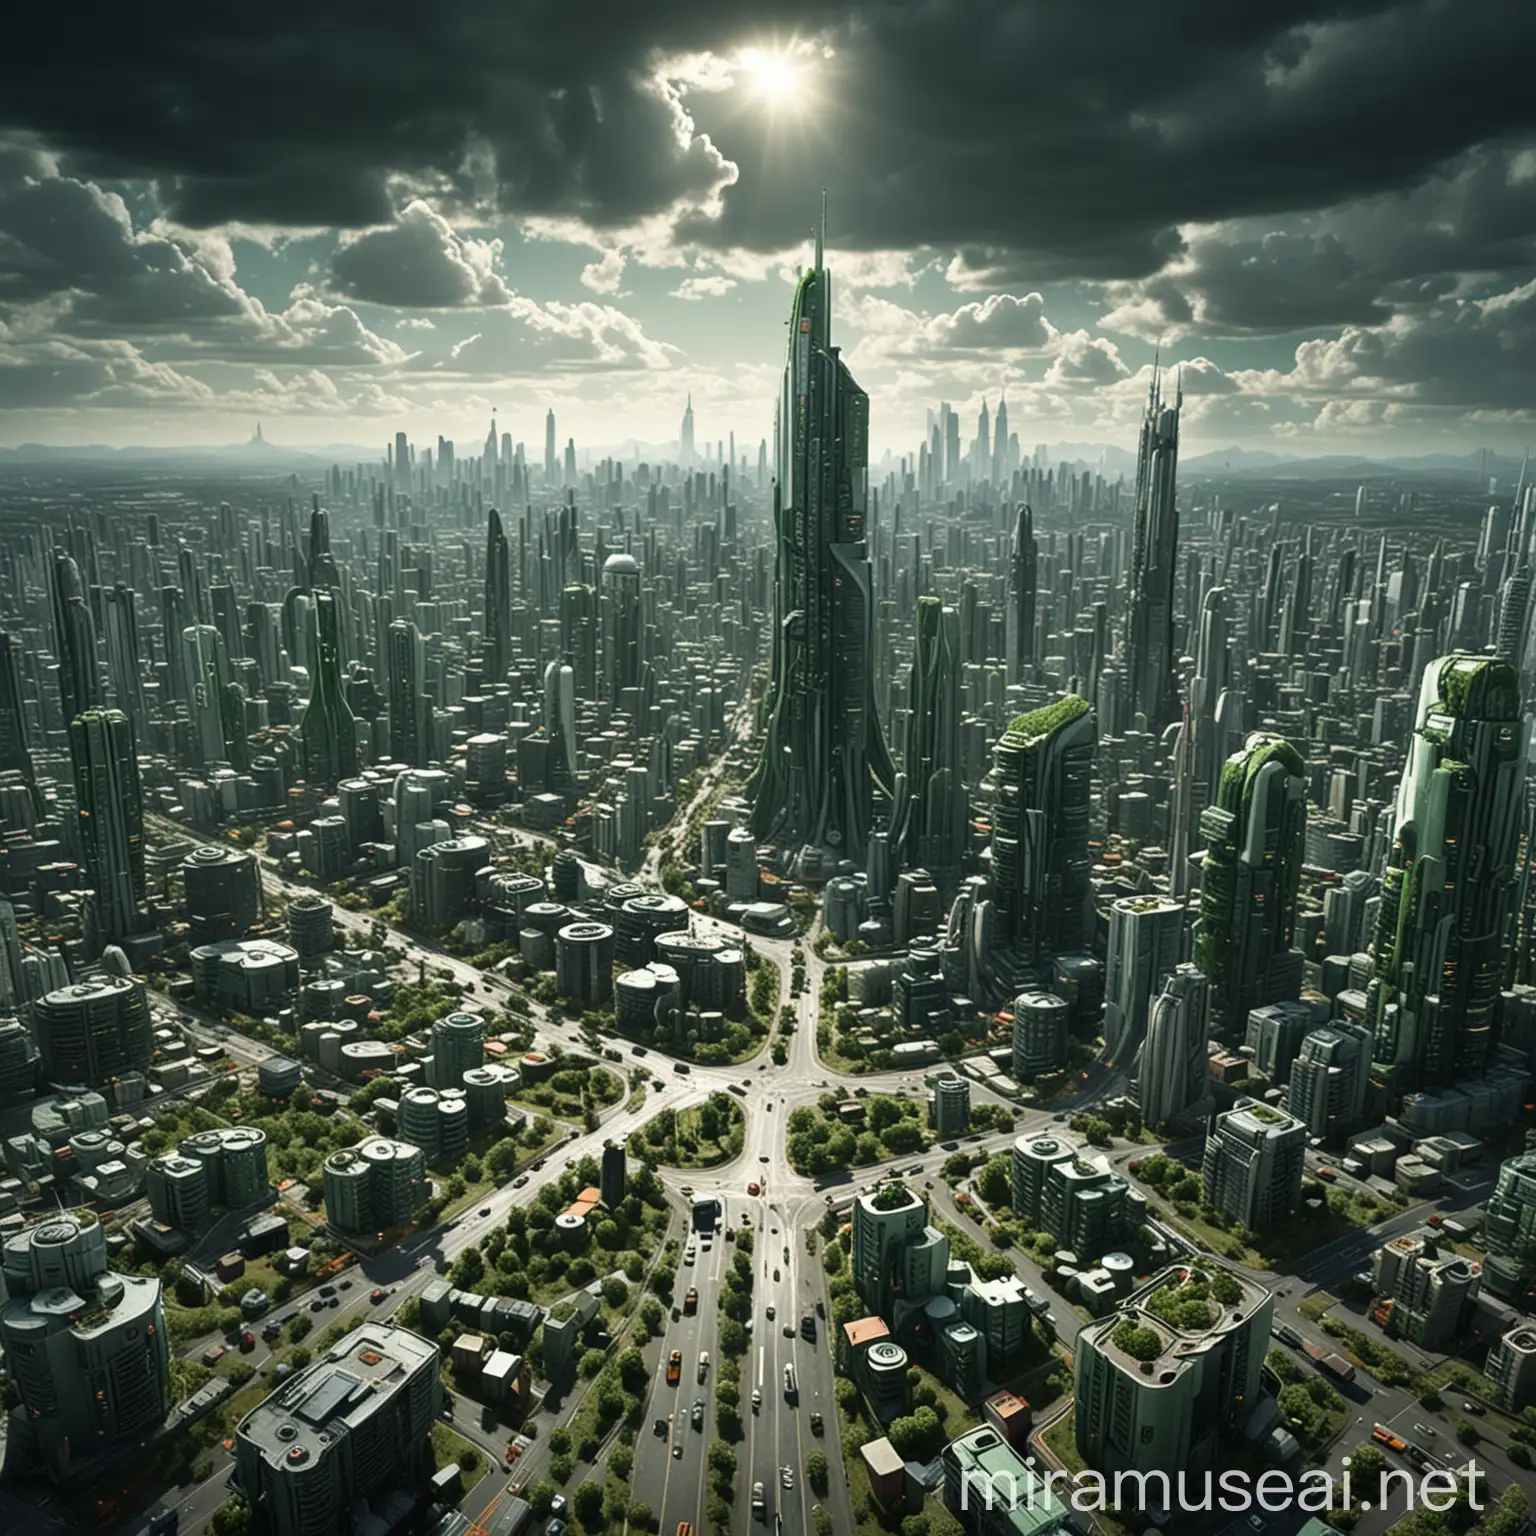 Create me a futuristic city using the Multiple Nucli Model. Make the central business distrcit in the middle. Industrial on the far edges. Make the city with sustainable elements and more green